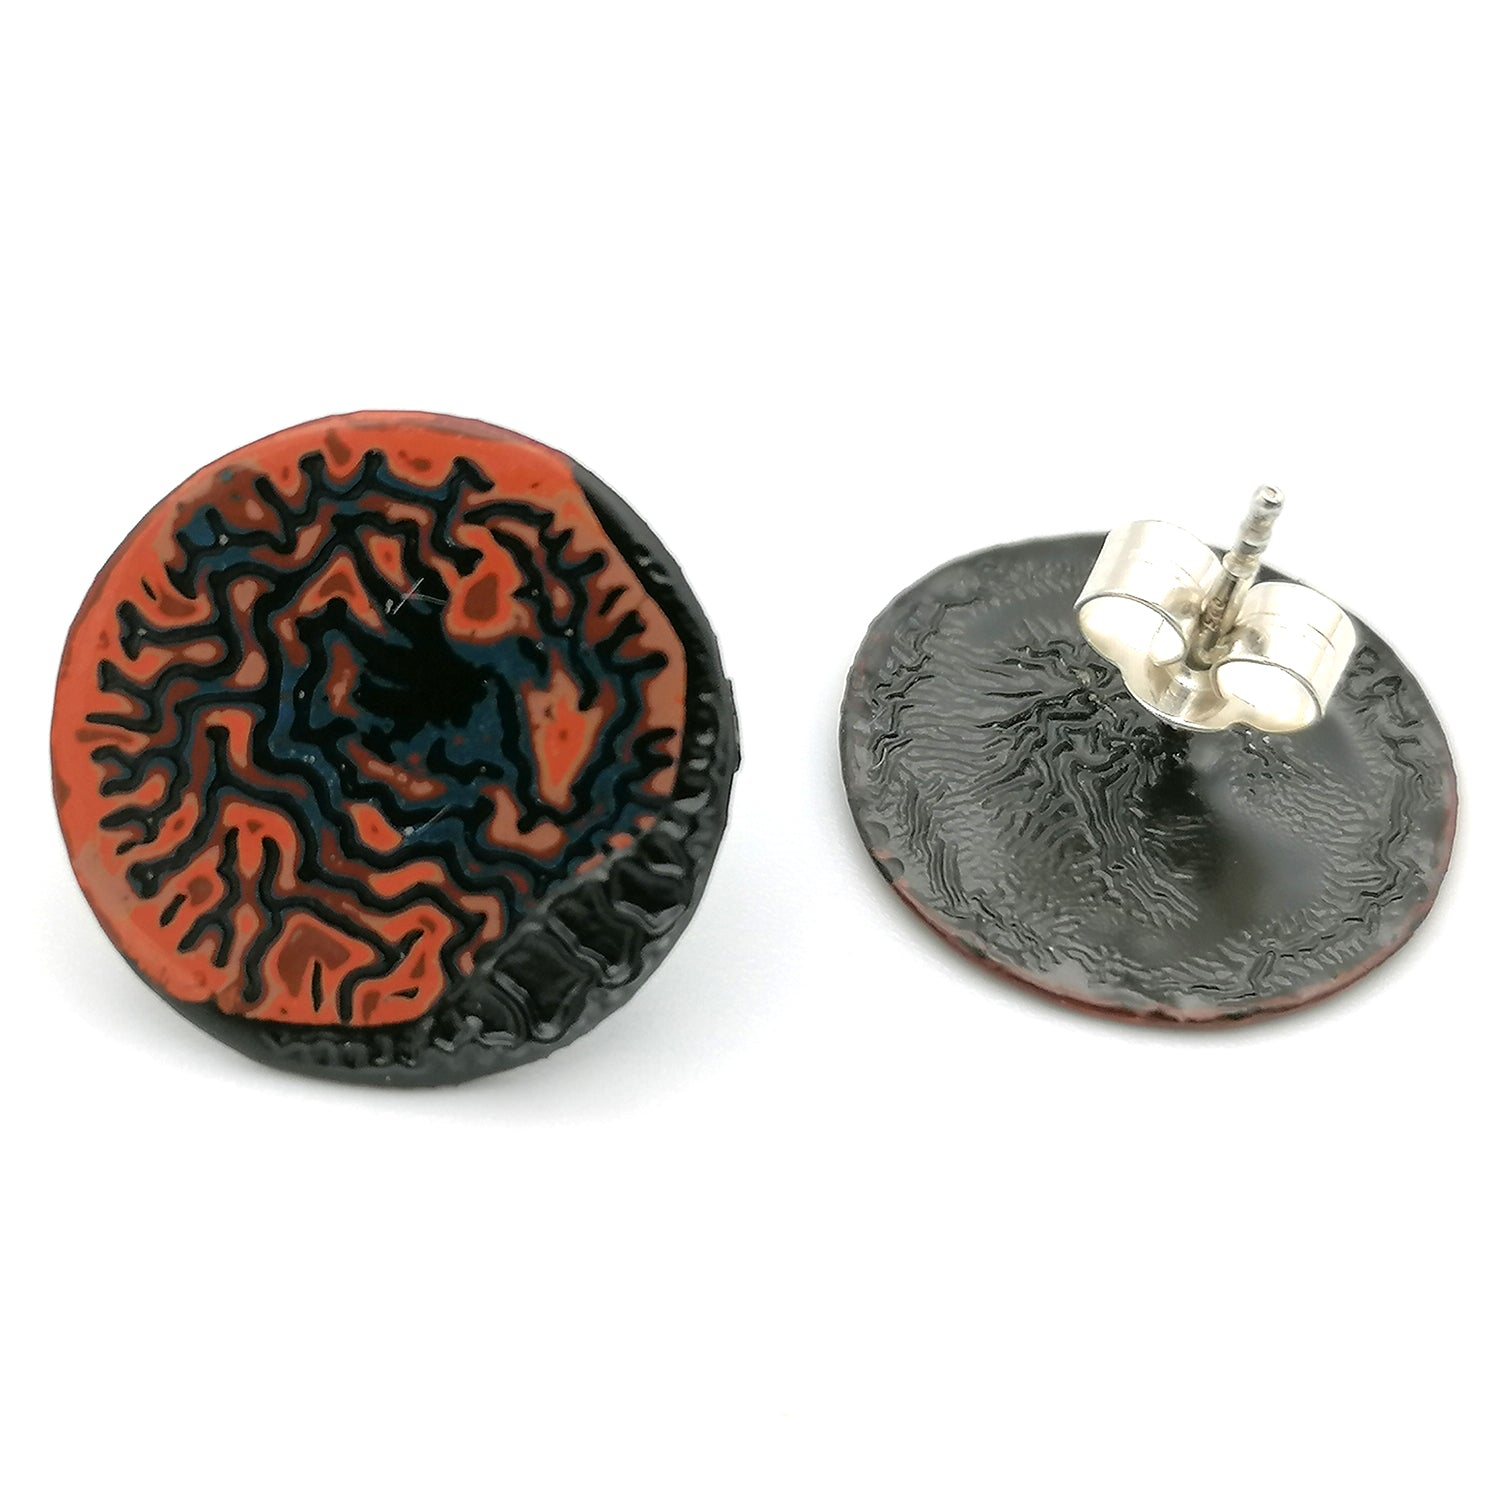 Image shows a pair of circle stud earrings on a white background, the second of which is upside down showing the sterling silver earring post. With a wrinkled pattern in orange, blue and red and a raised black winkle textured rim.